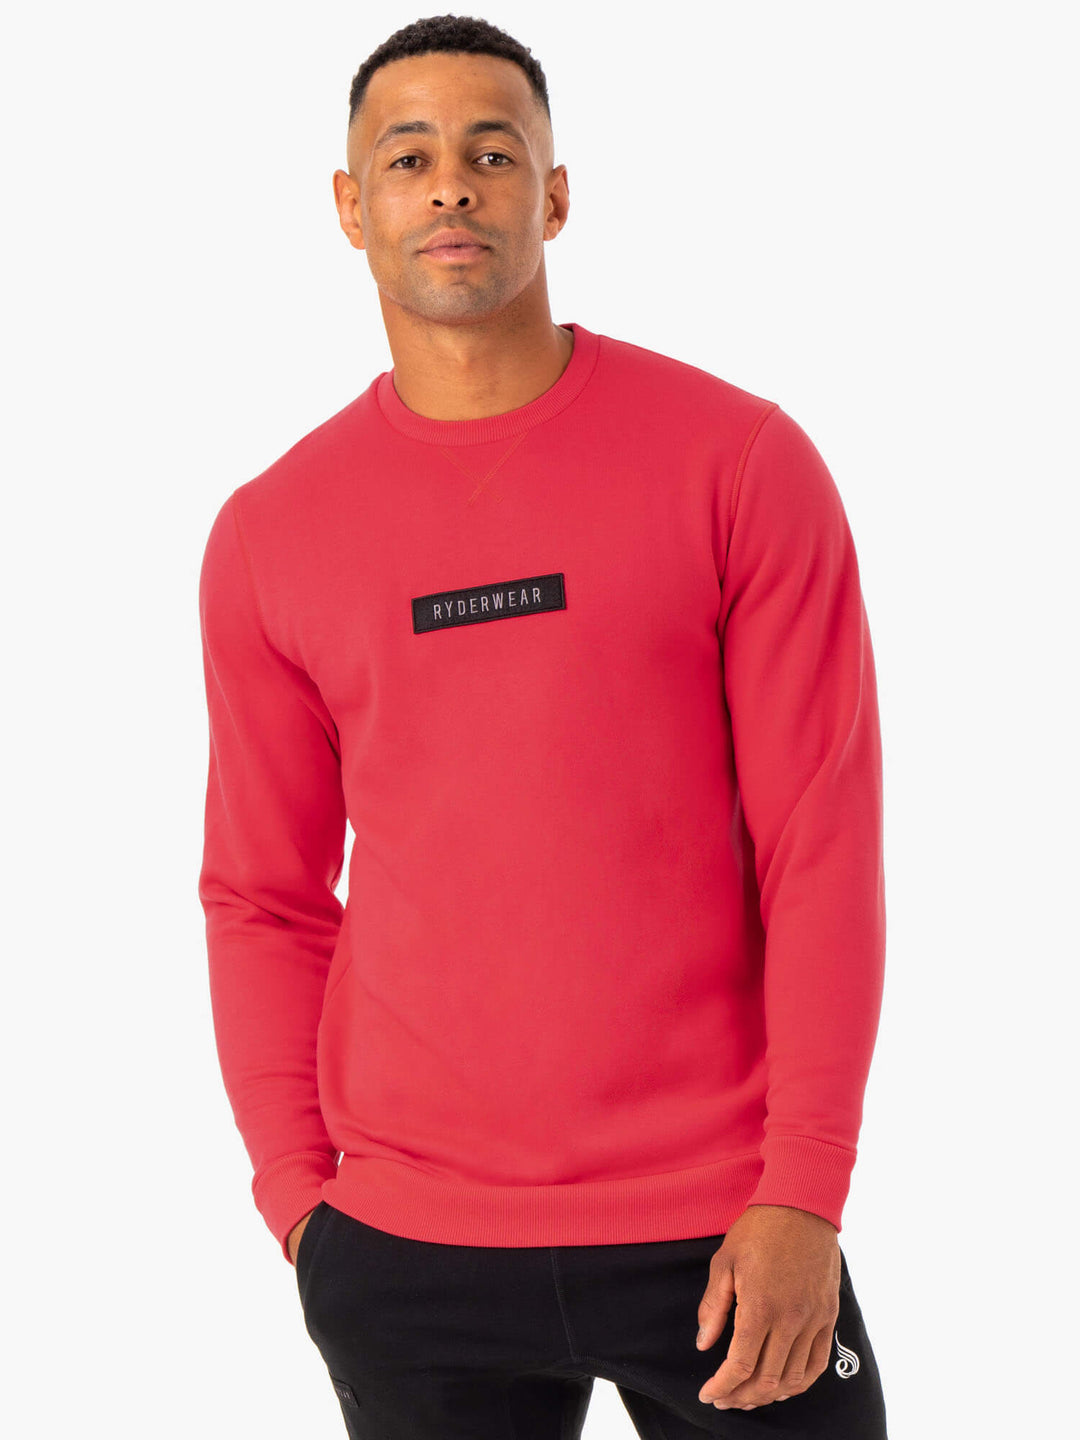 Recharge Pullover - Red Clothing Ryderwear 